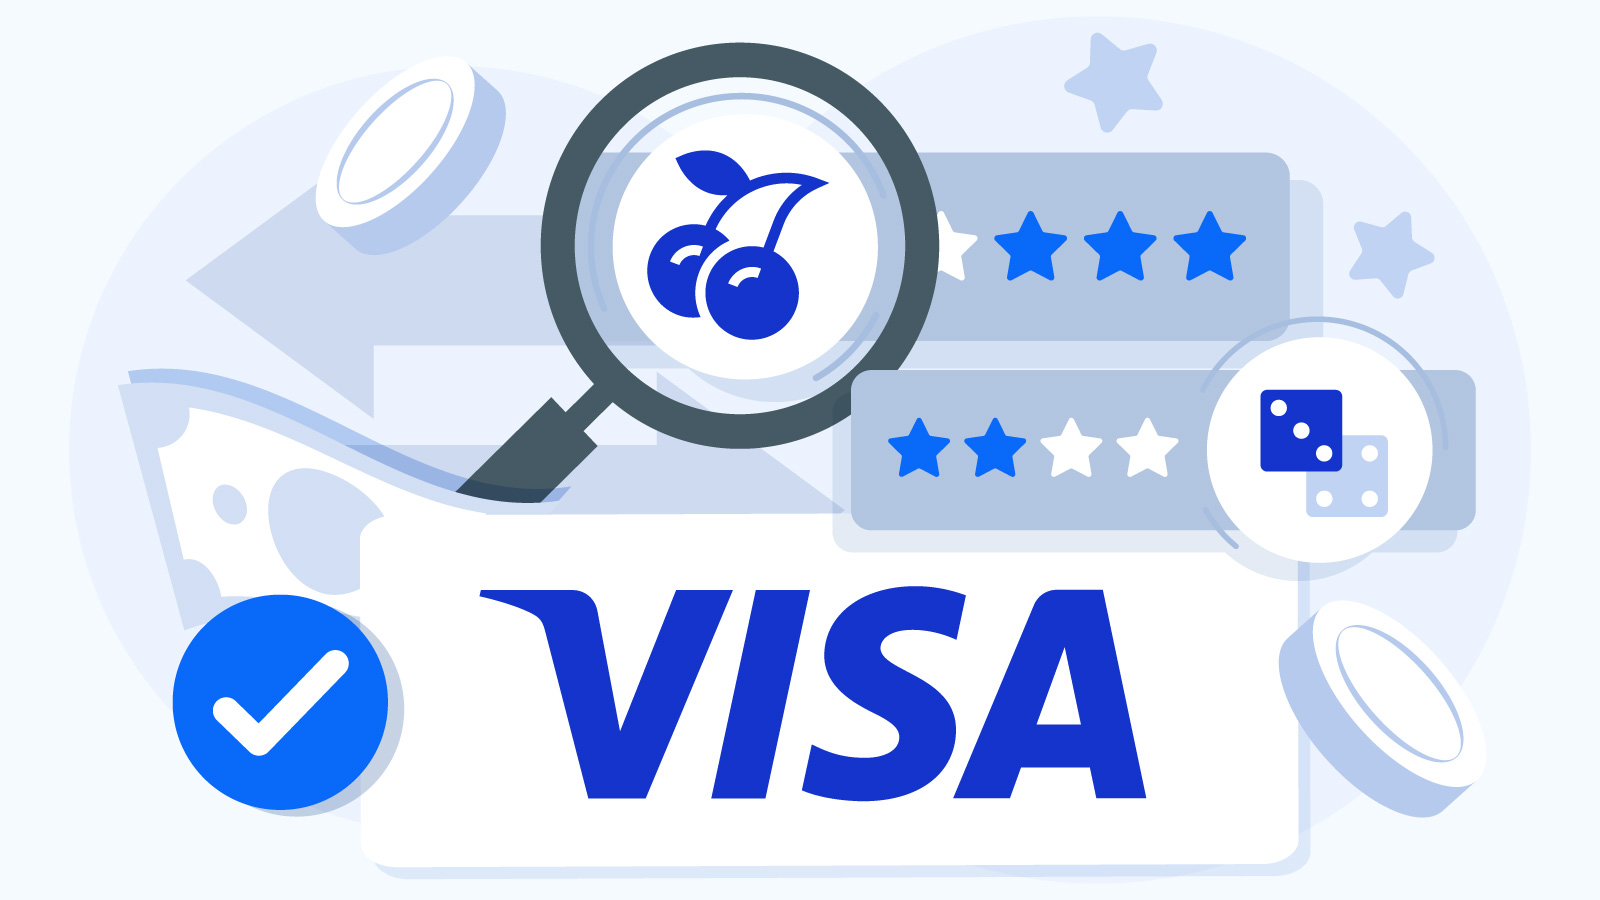 5 Easy Steps To Pick Only The Best Visa Online Casinos